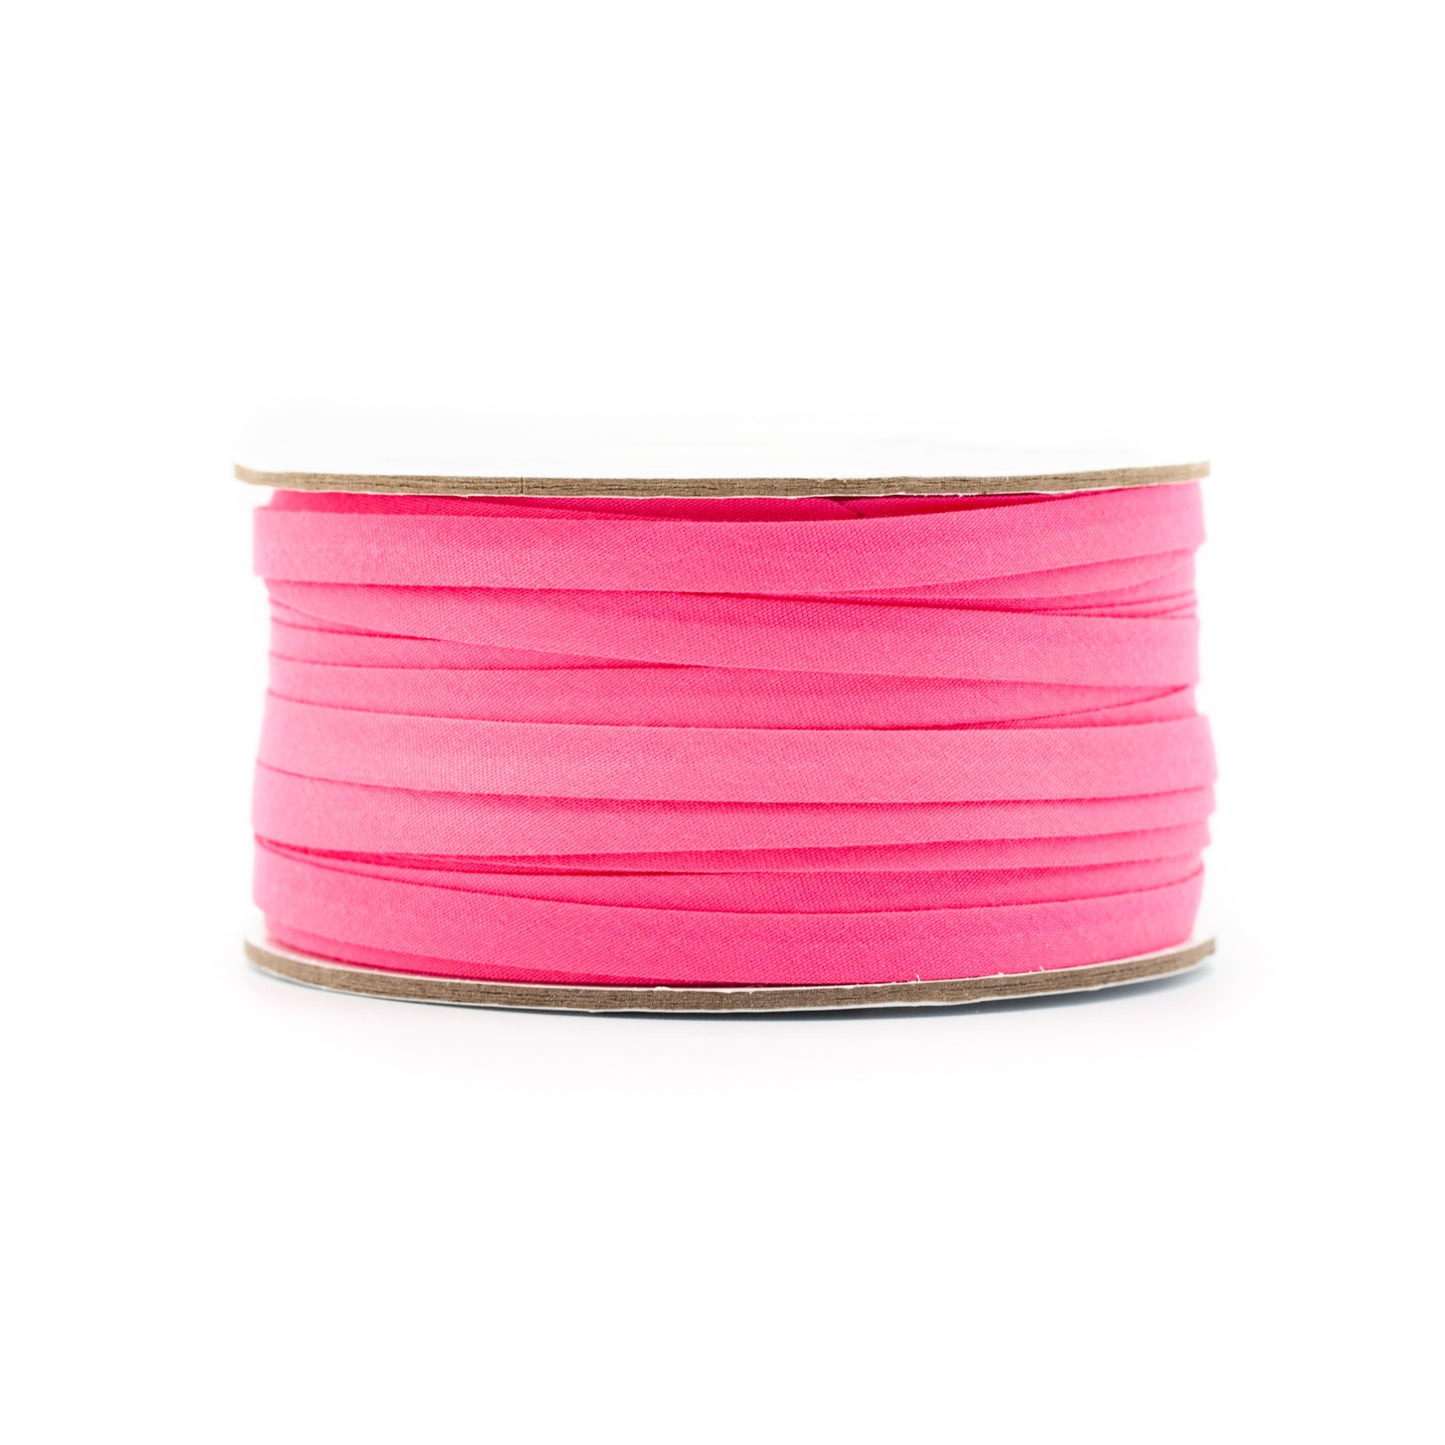 Bias Tape - 7mm - Hot Pink (stand)